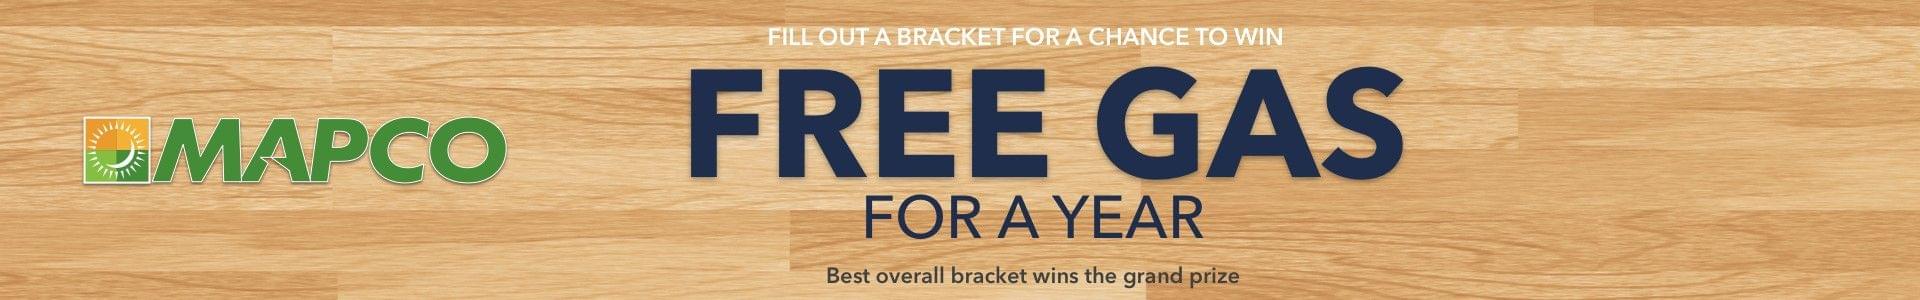 Mapco's - Win Free Gas for a Year - Tournament Bracket 2017